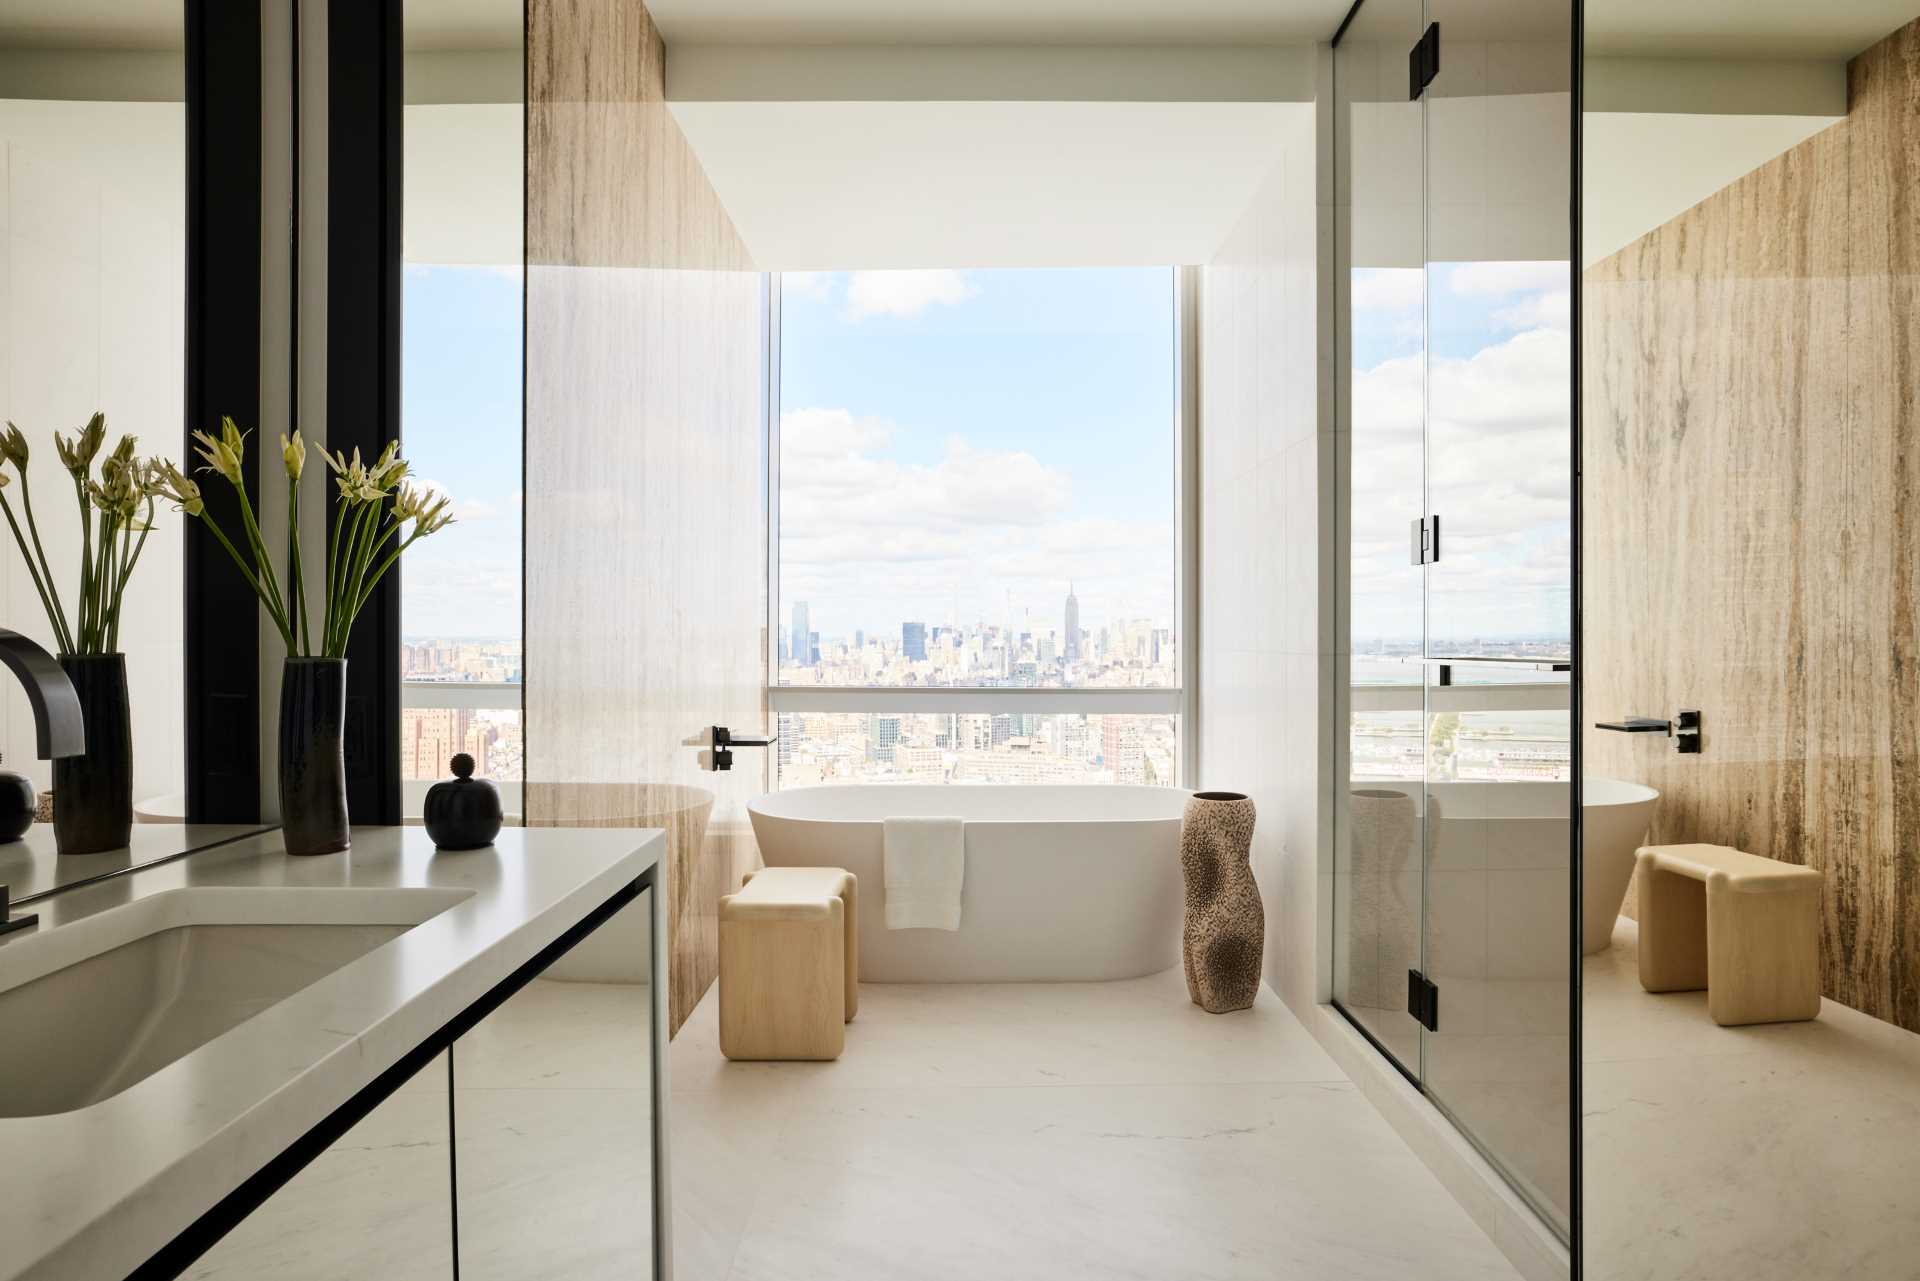 In this modern bathroom, a freestanding bathtub is positioned in front of a window that perfectly frames the city views.